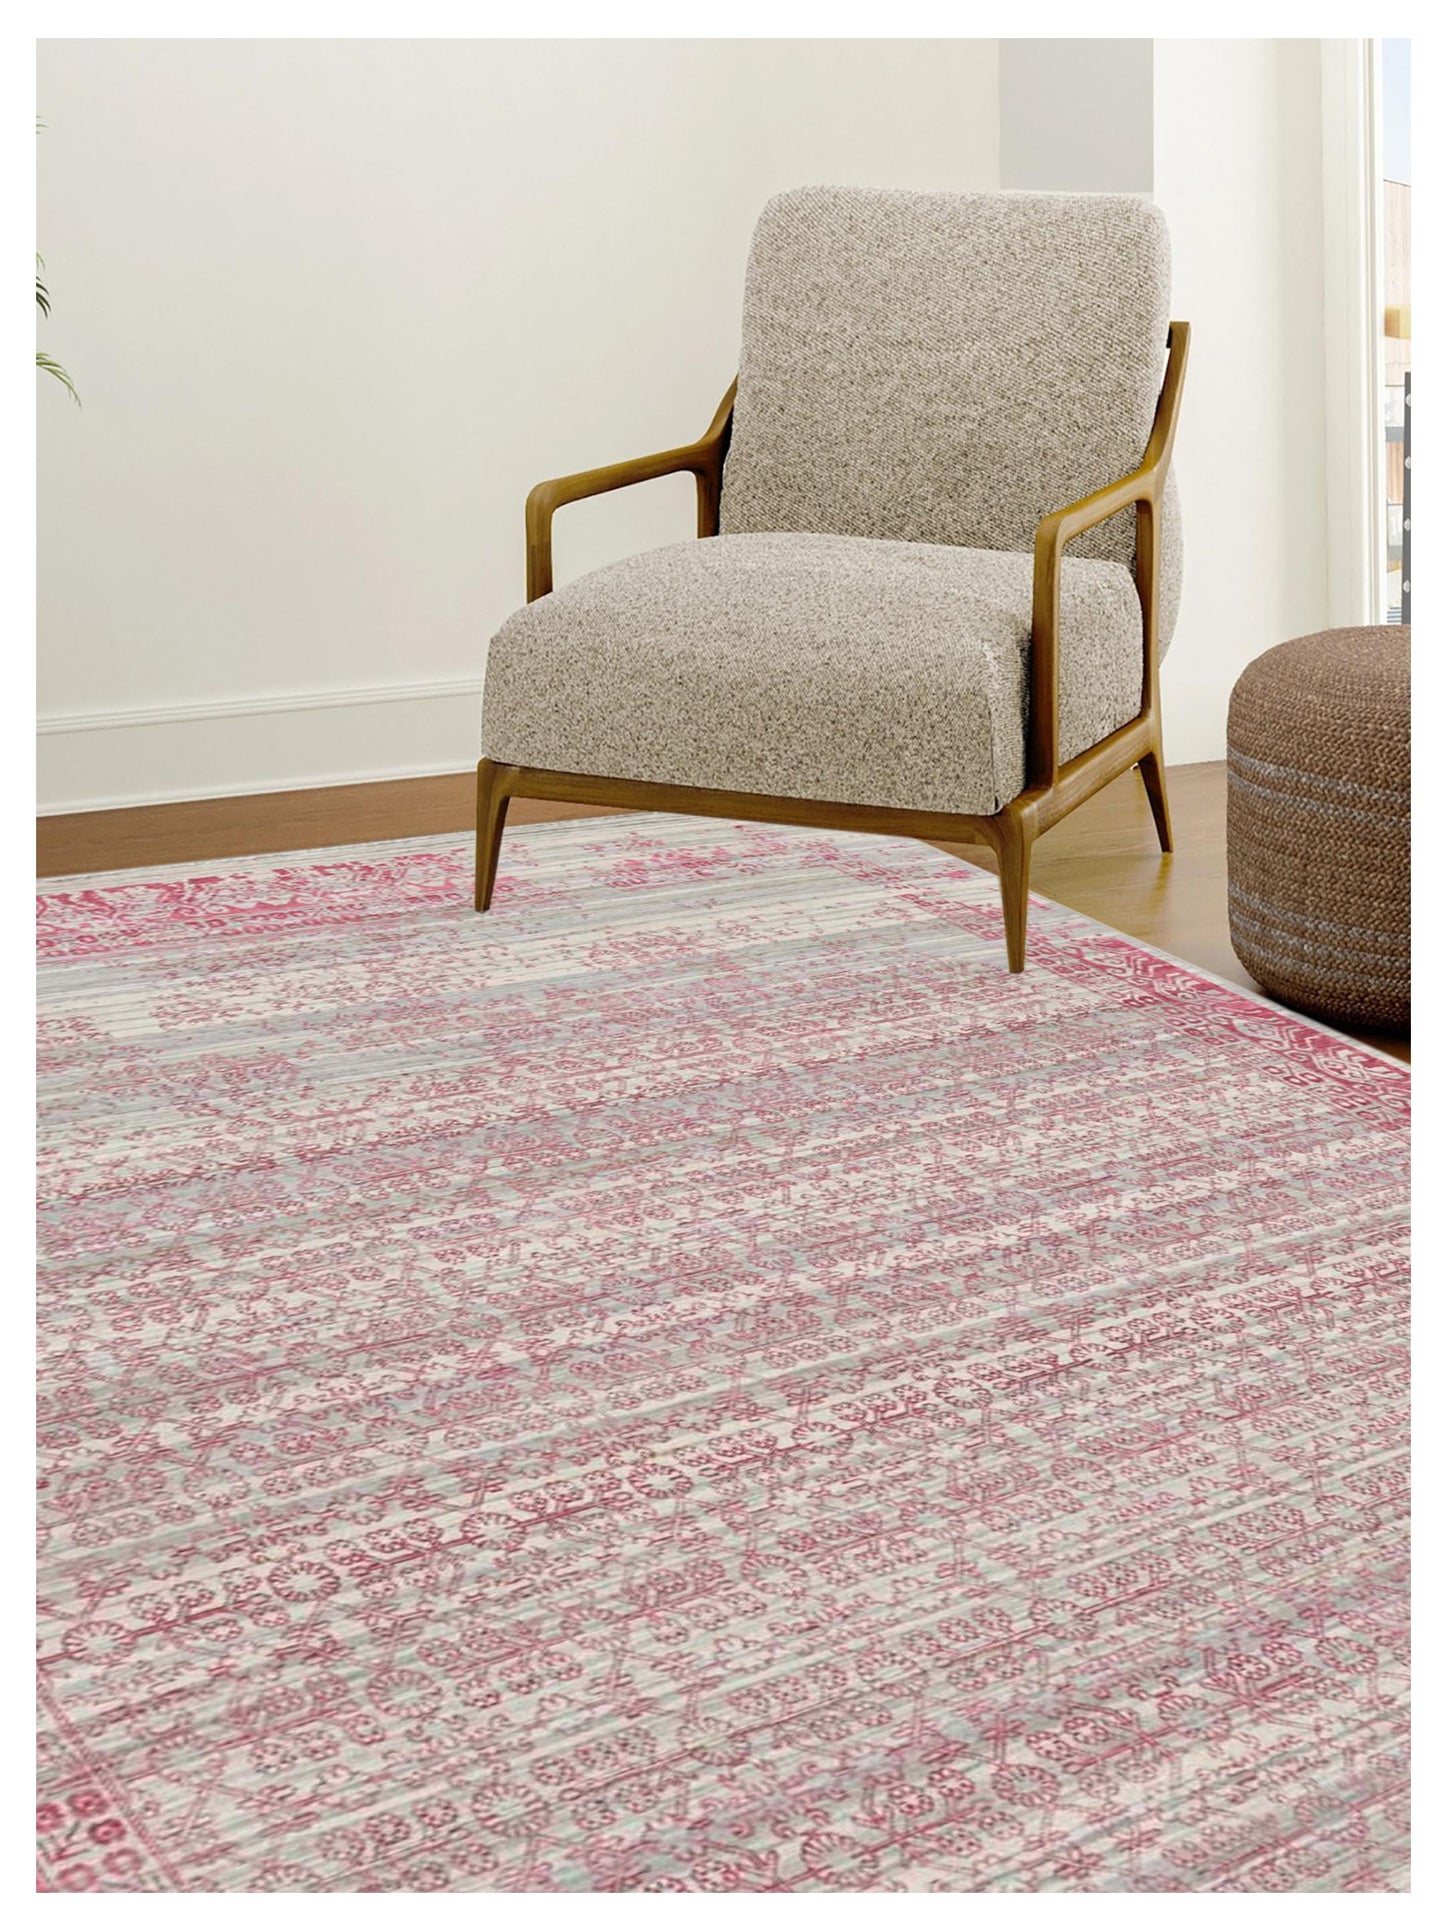 Limited PARKES PA-573 Ivory  Transitional Knotted Rug